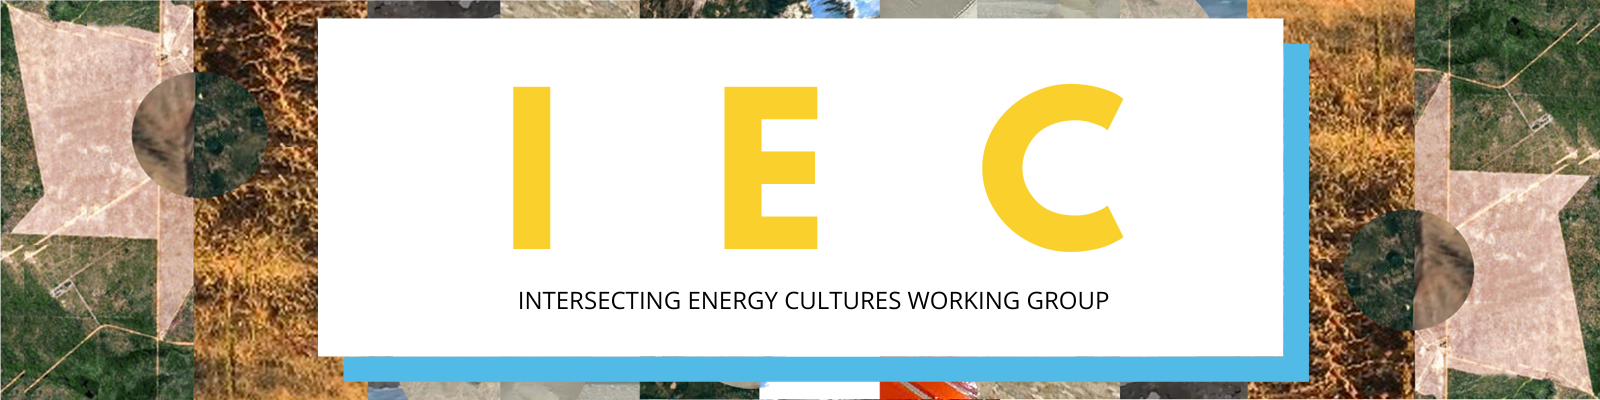 Intersecting Energy Cultures logo